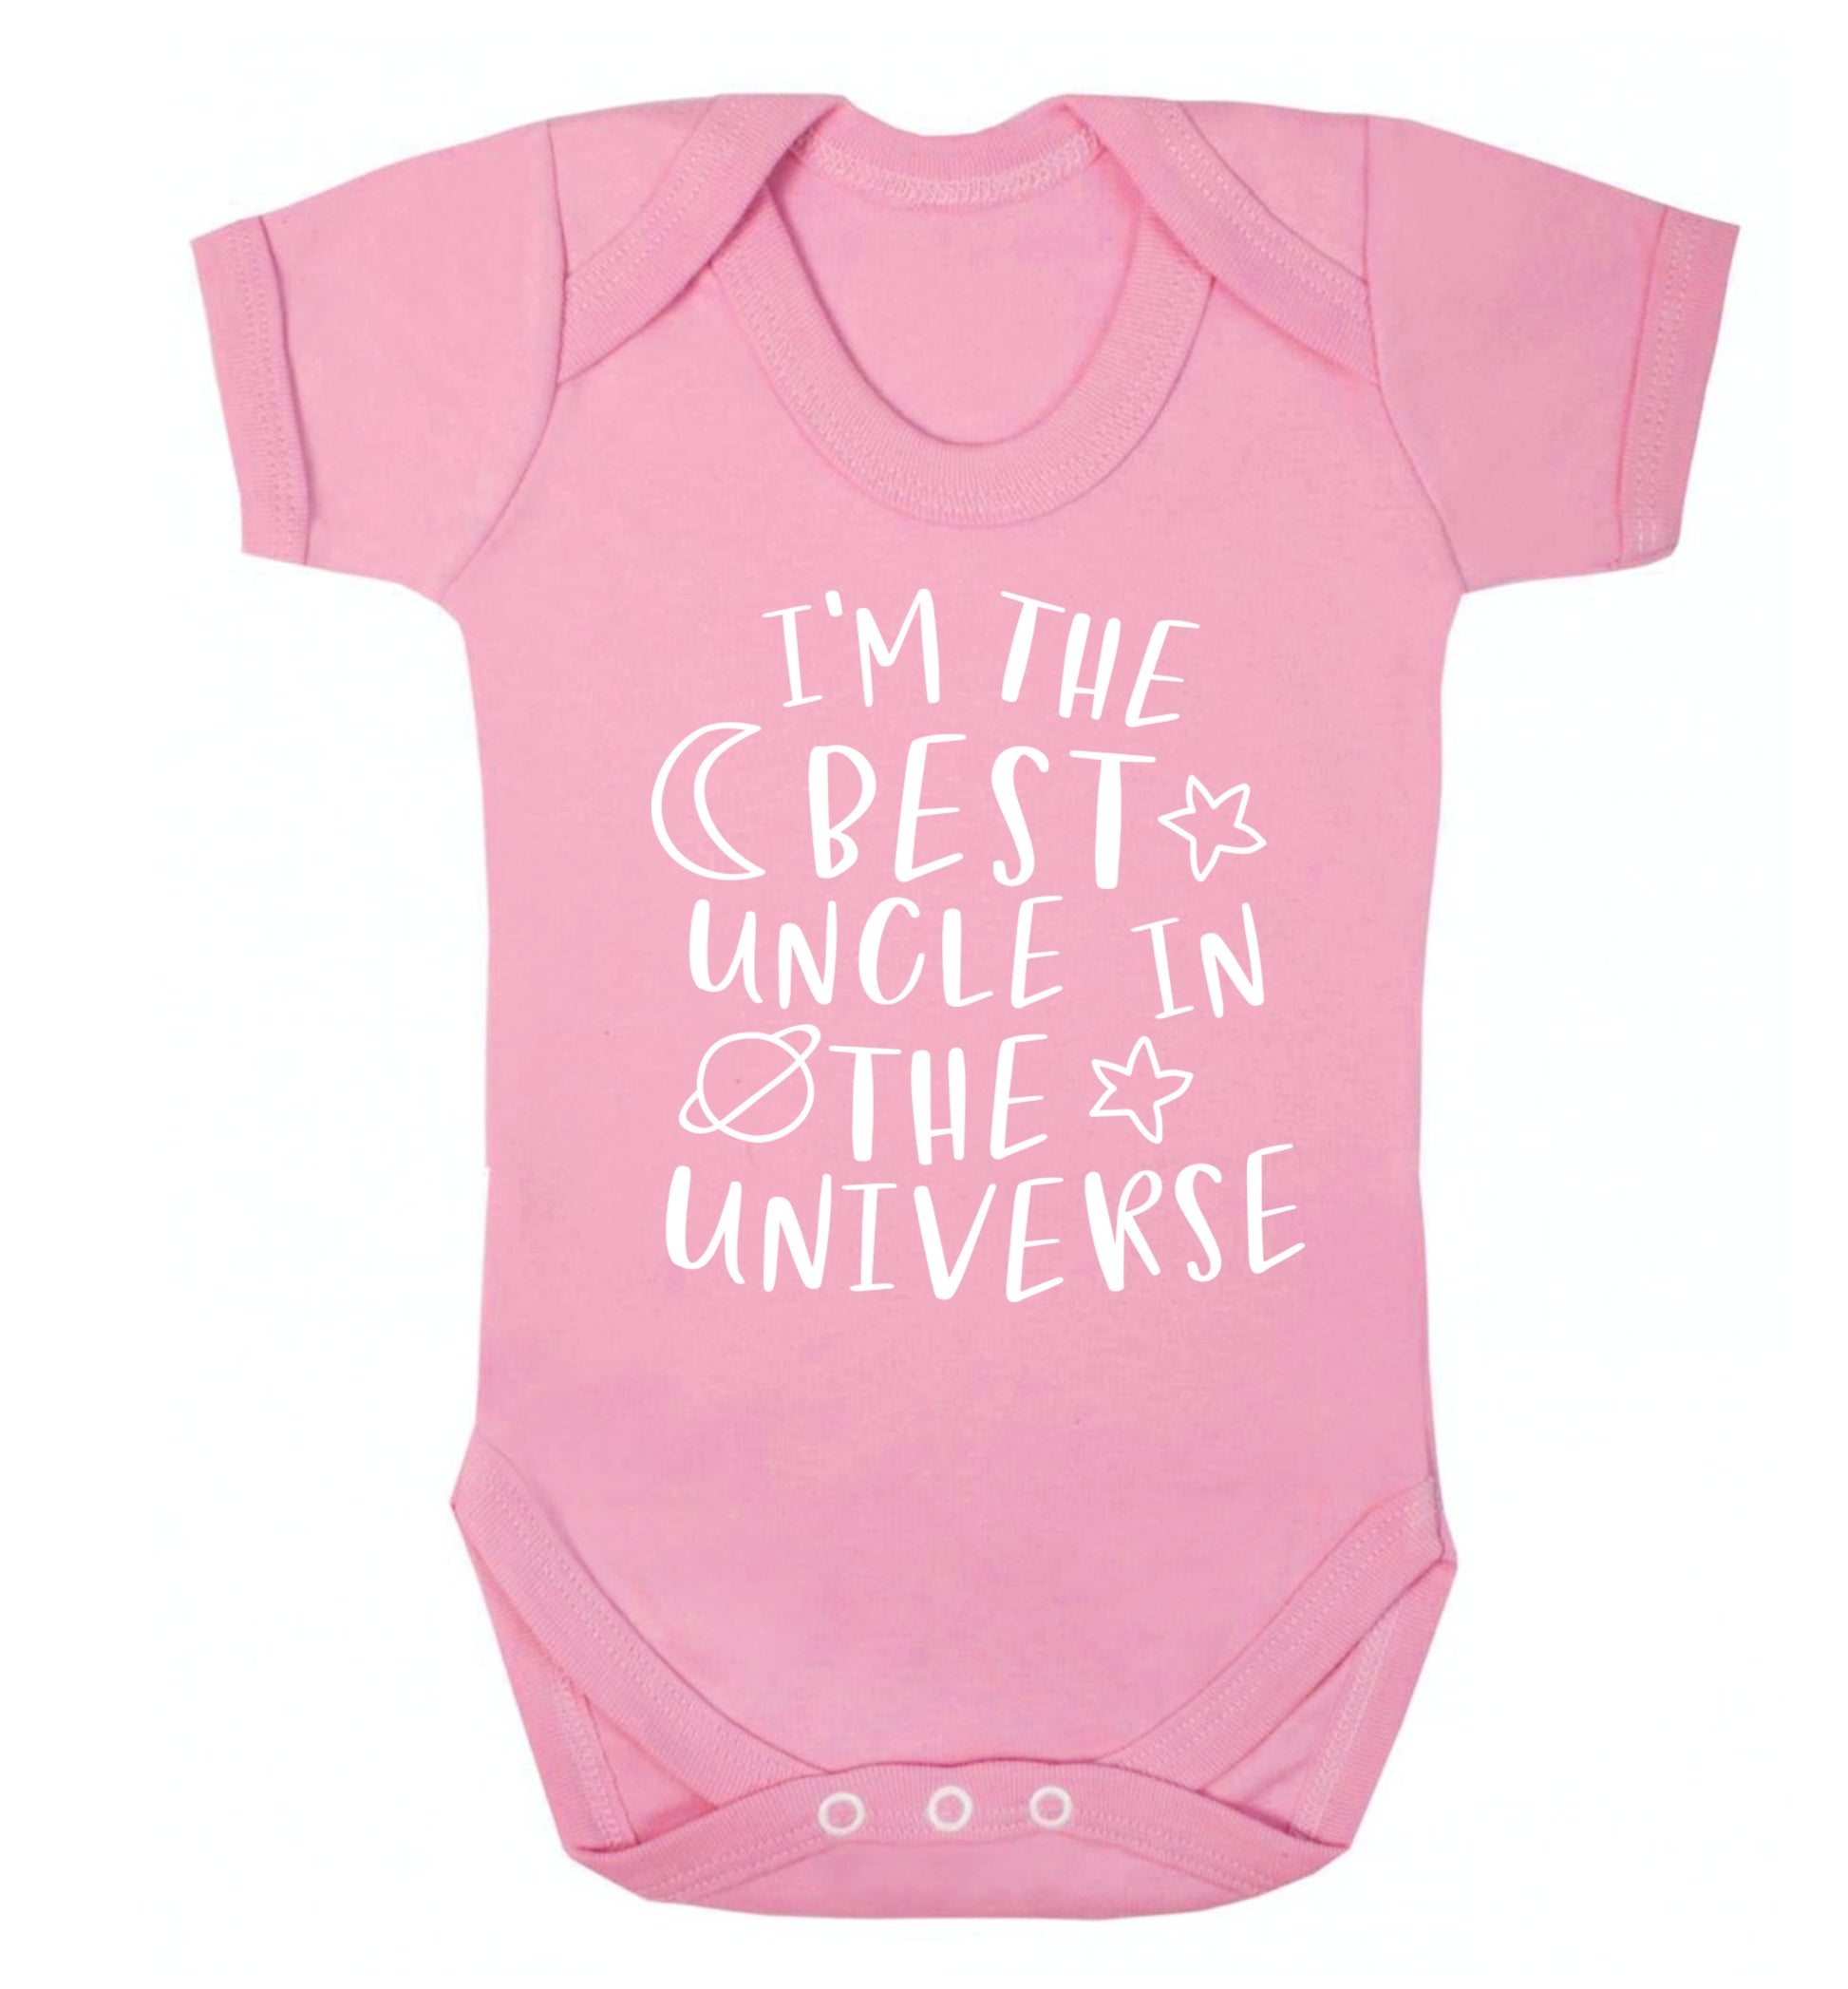 I'm the best uncle in the universe Baby Vest pale pink 18-24 months